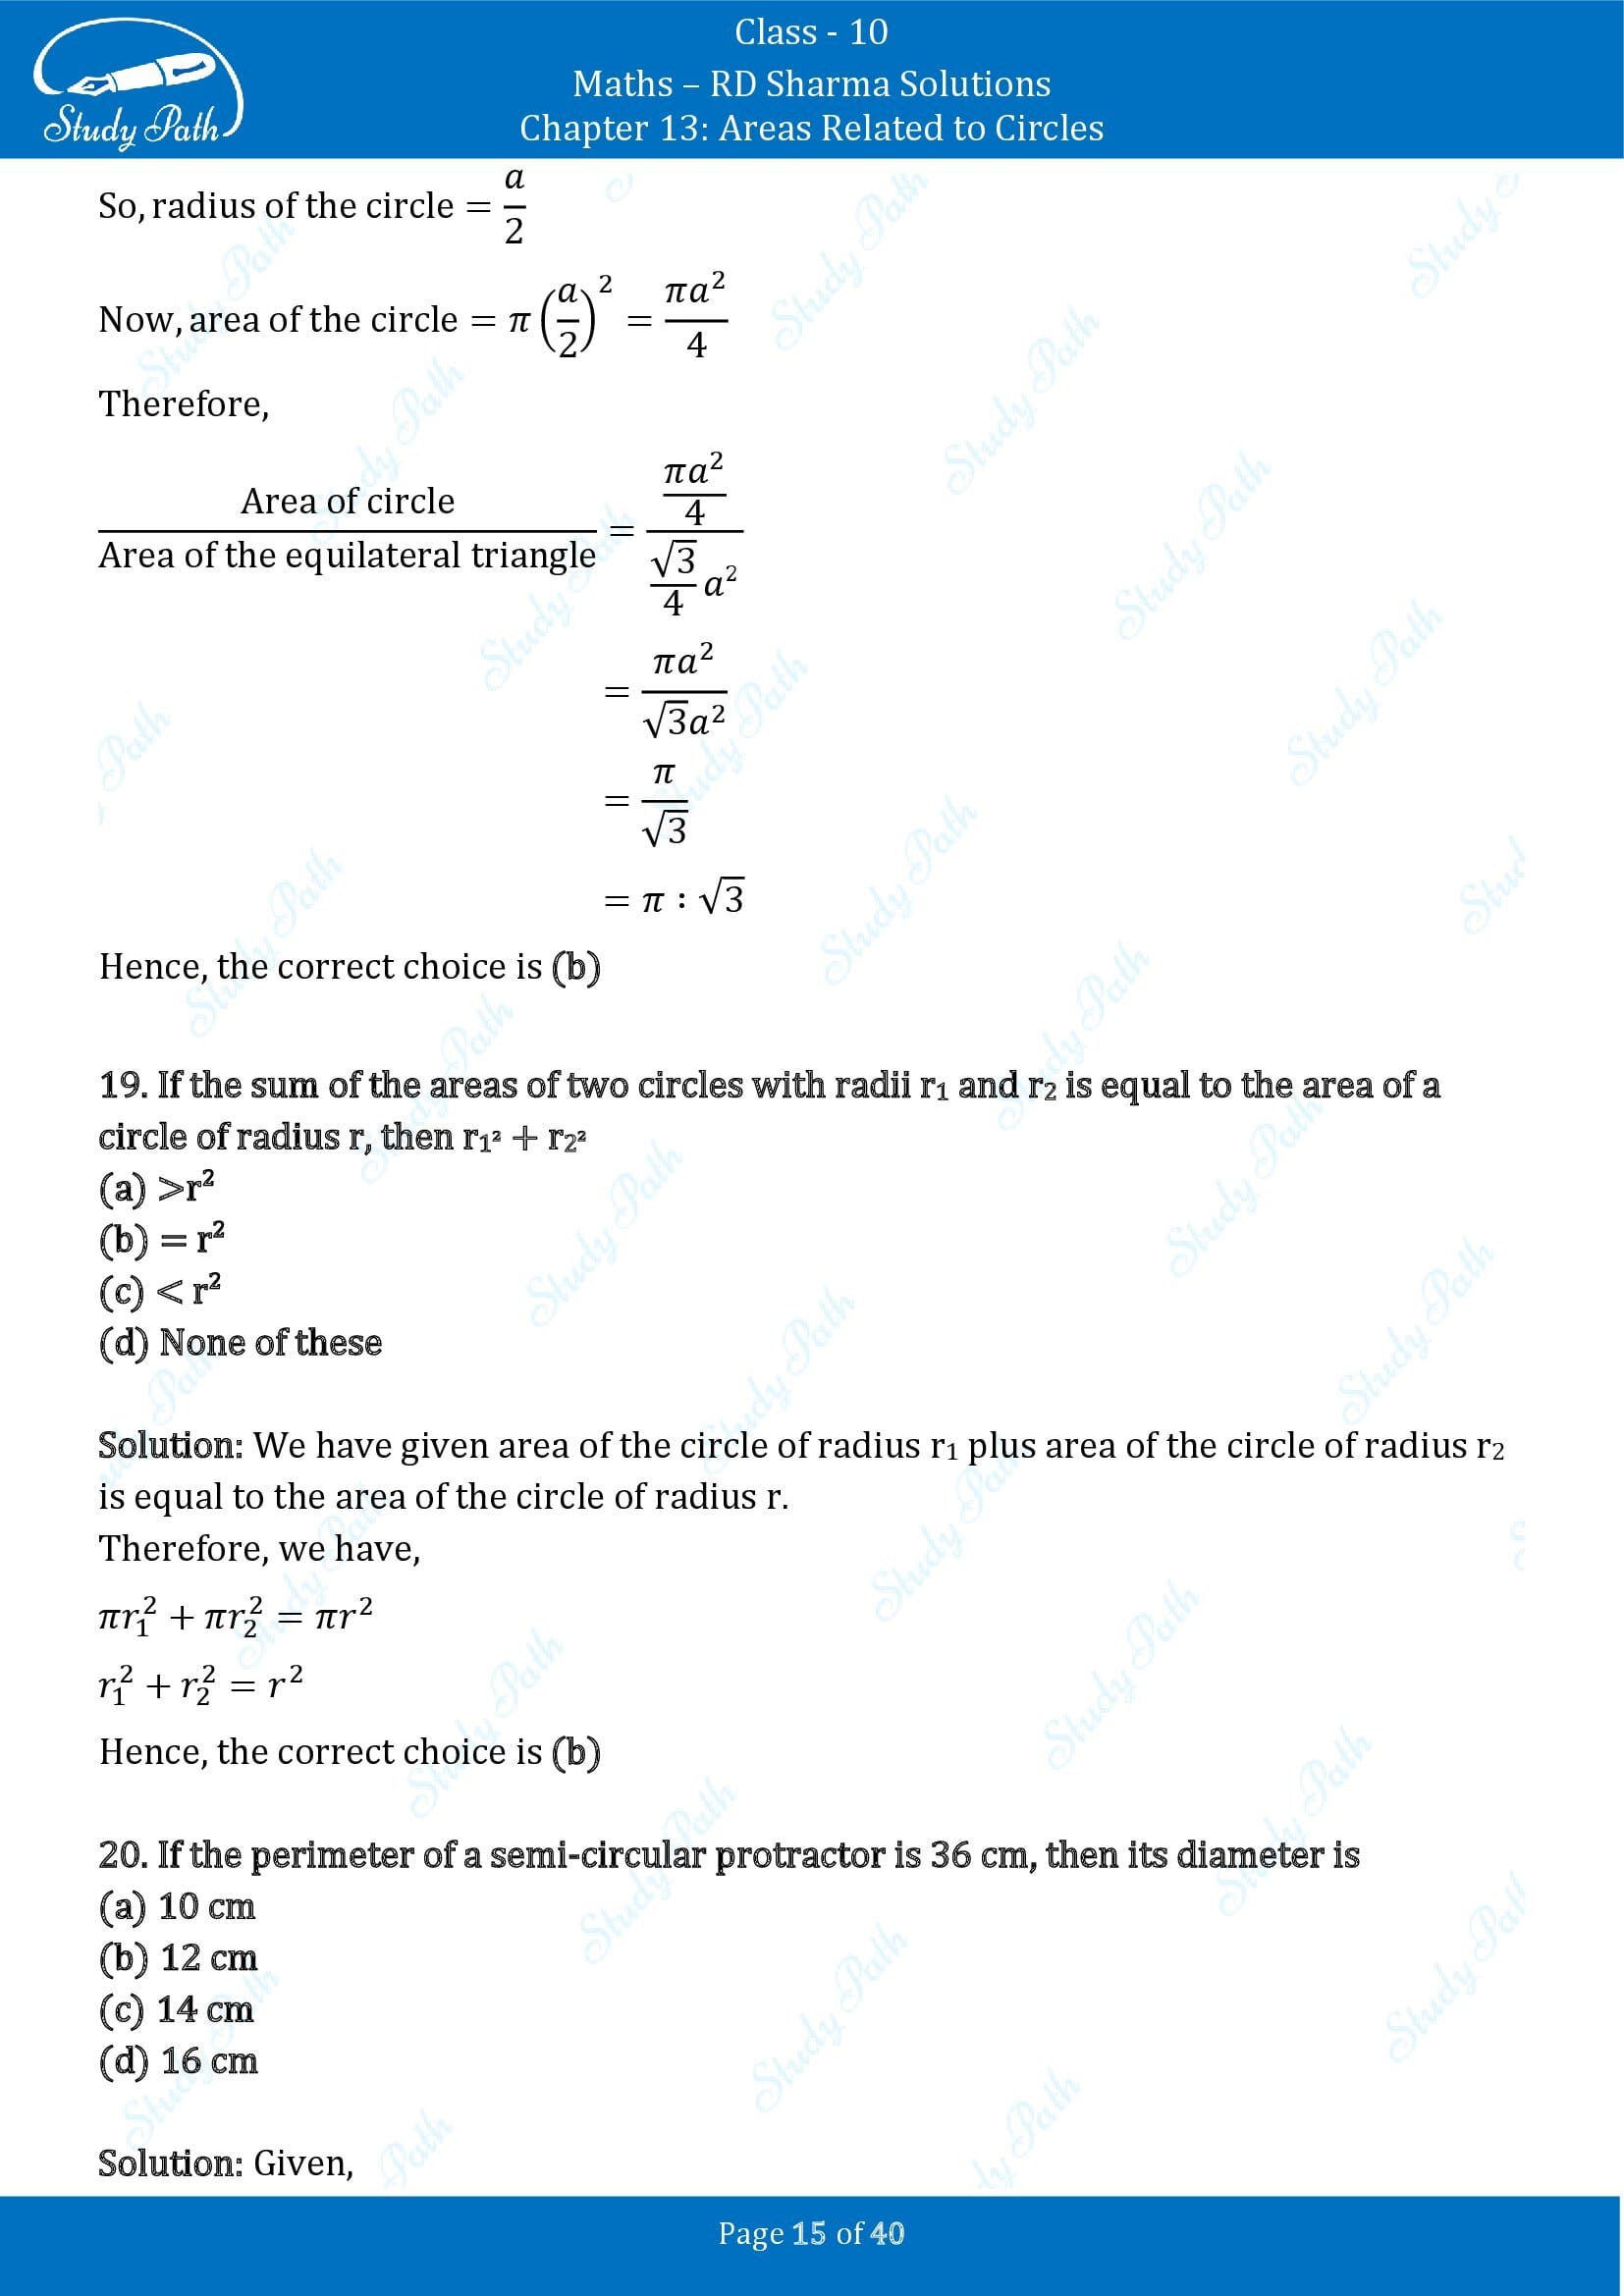 RD Sharma Solutions Class 10 Chapter 13 Areas Related to Circles Multiple Choice Question MCQs 00015